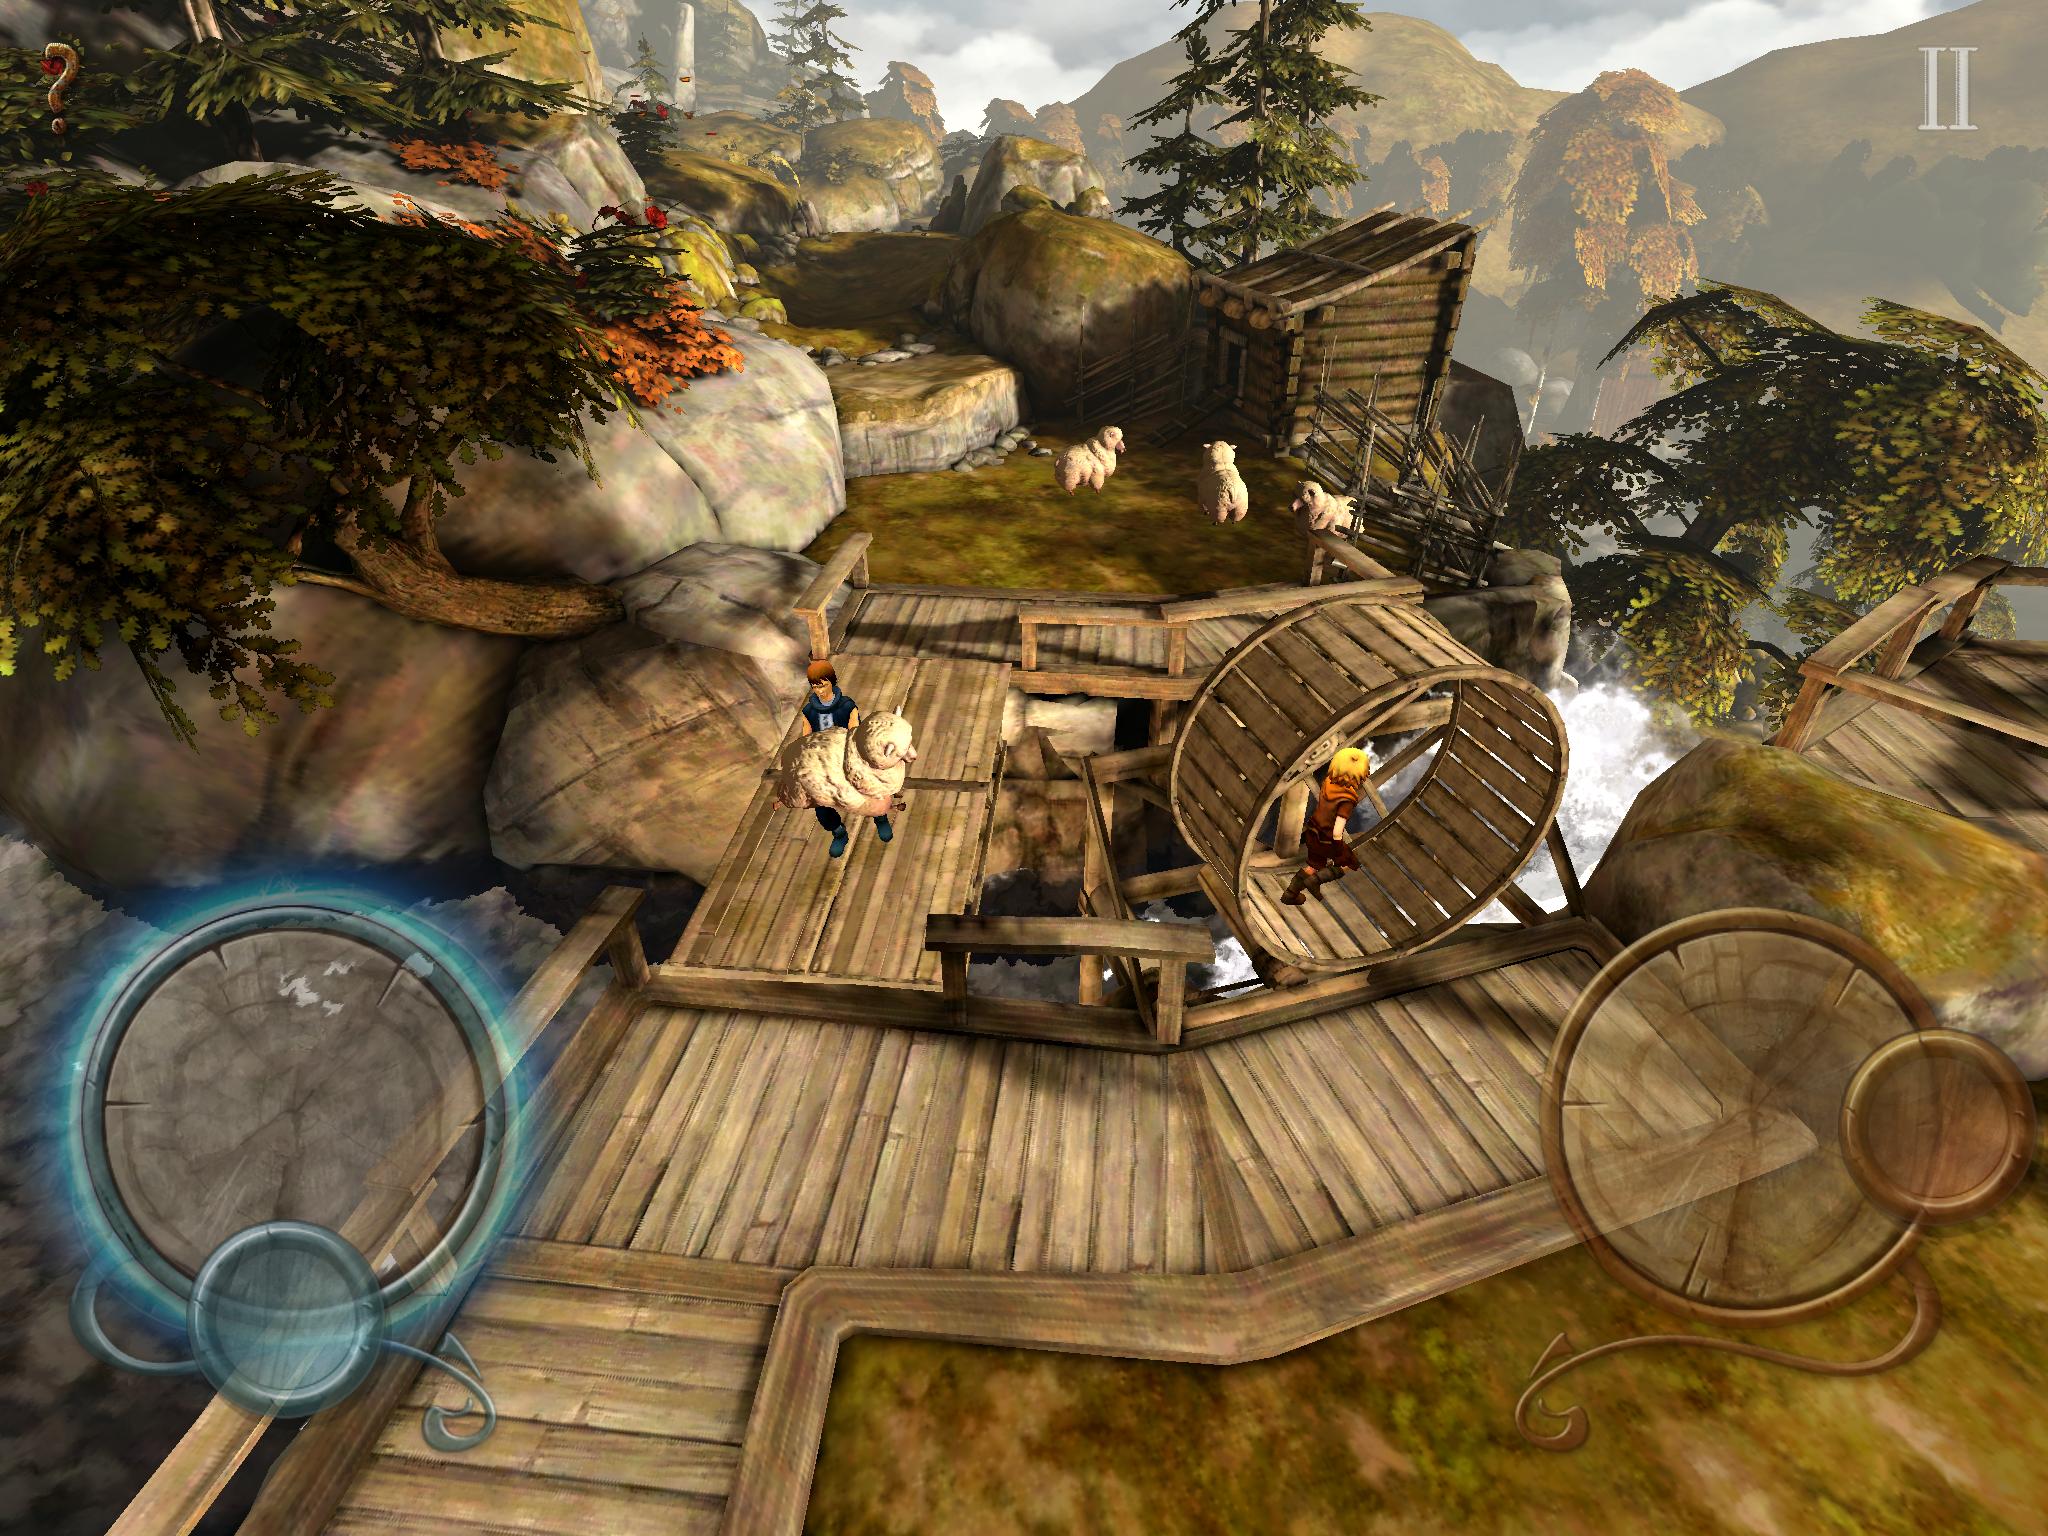 Игра brothers a Tale. Brothers: a Tale of two sons андроид. Two brothers игра. Brothers: a Tale of two sons (2013). Игра брата 4